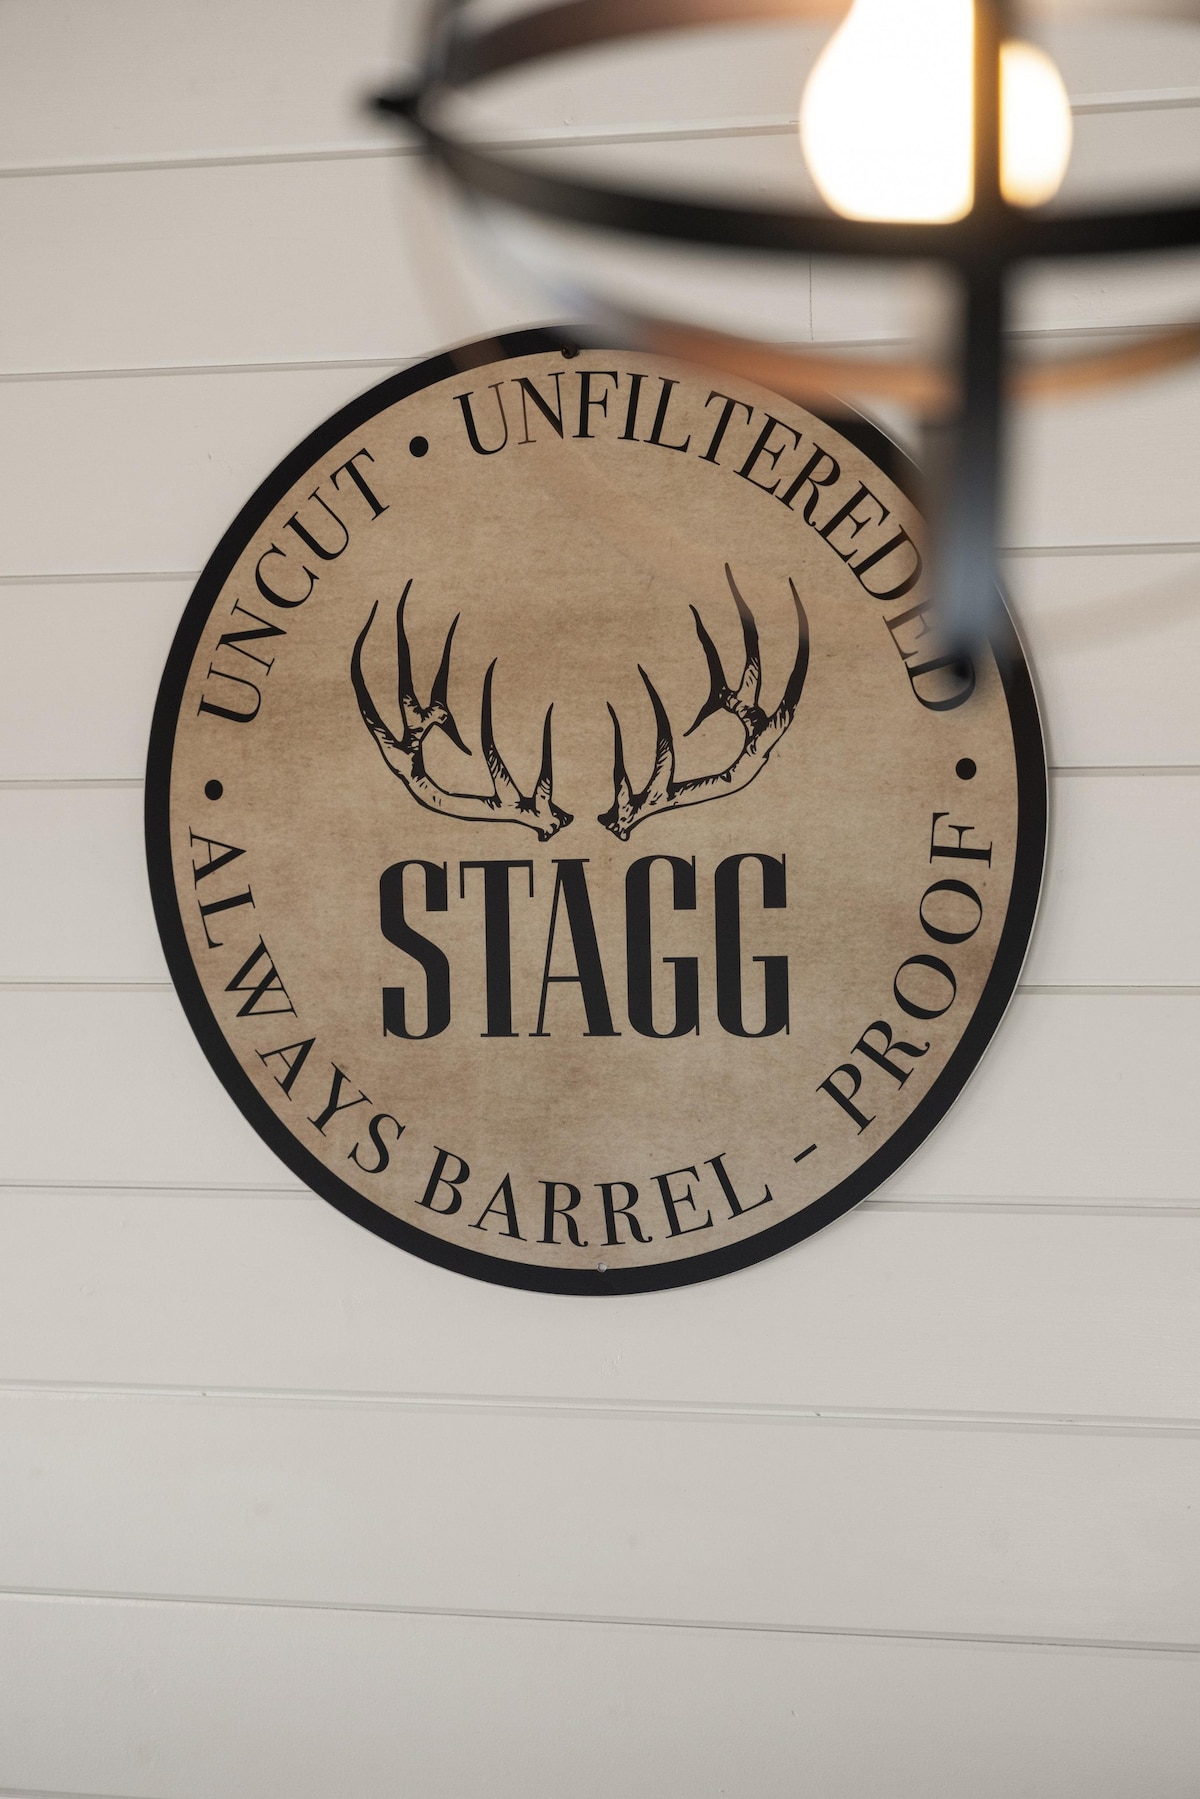 The Stagg Haus